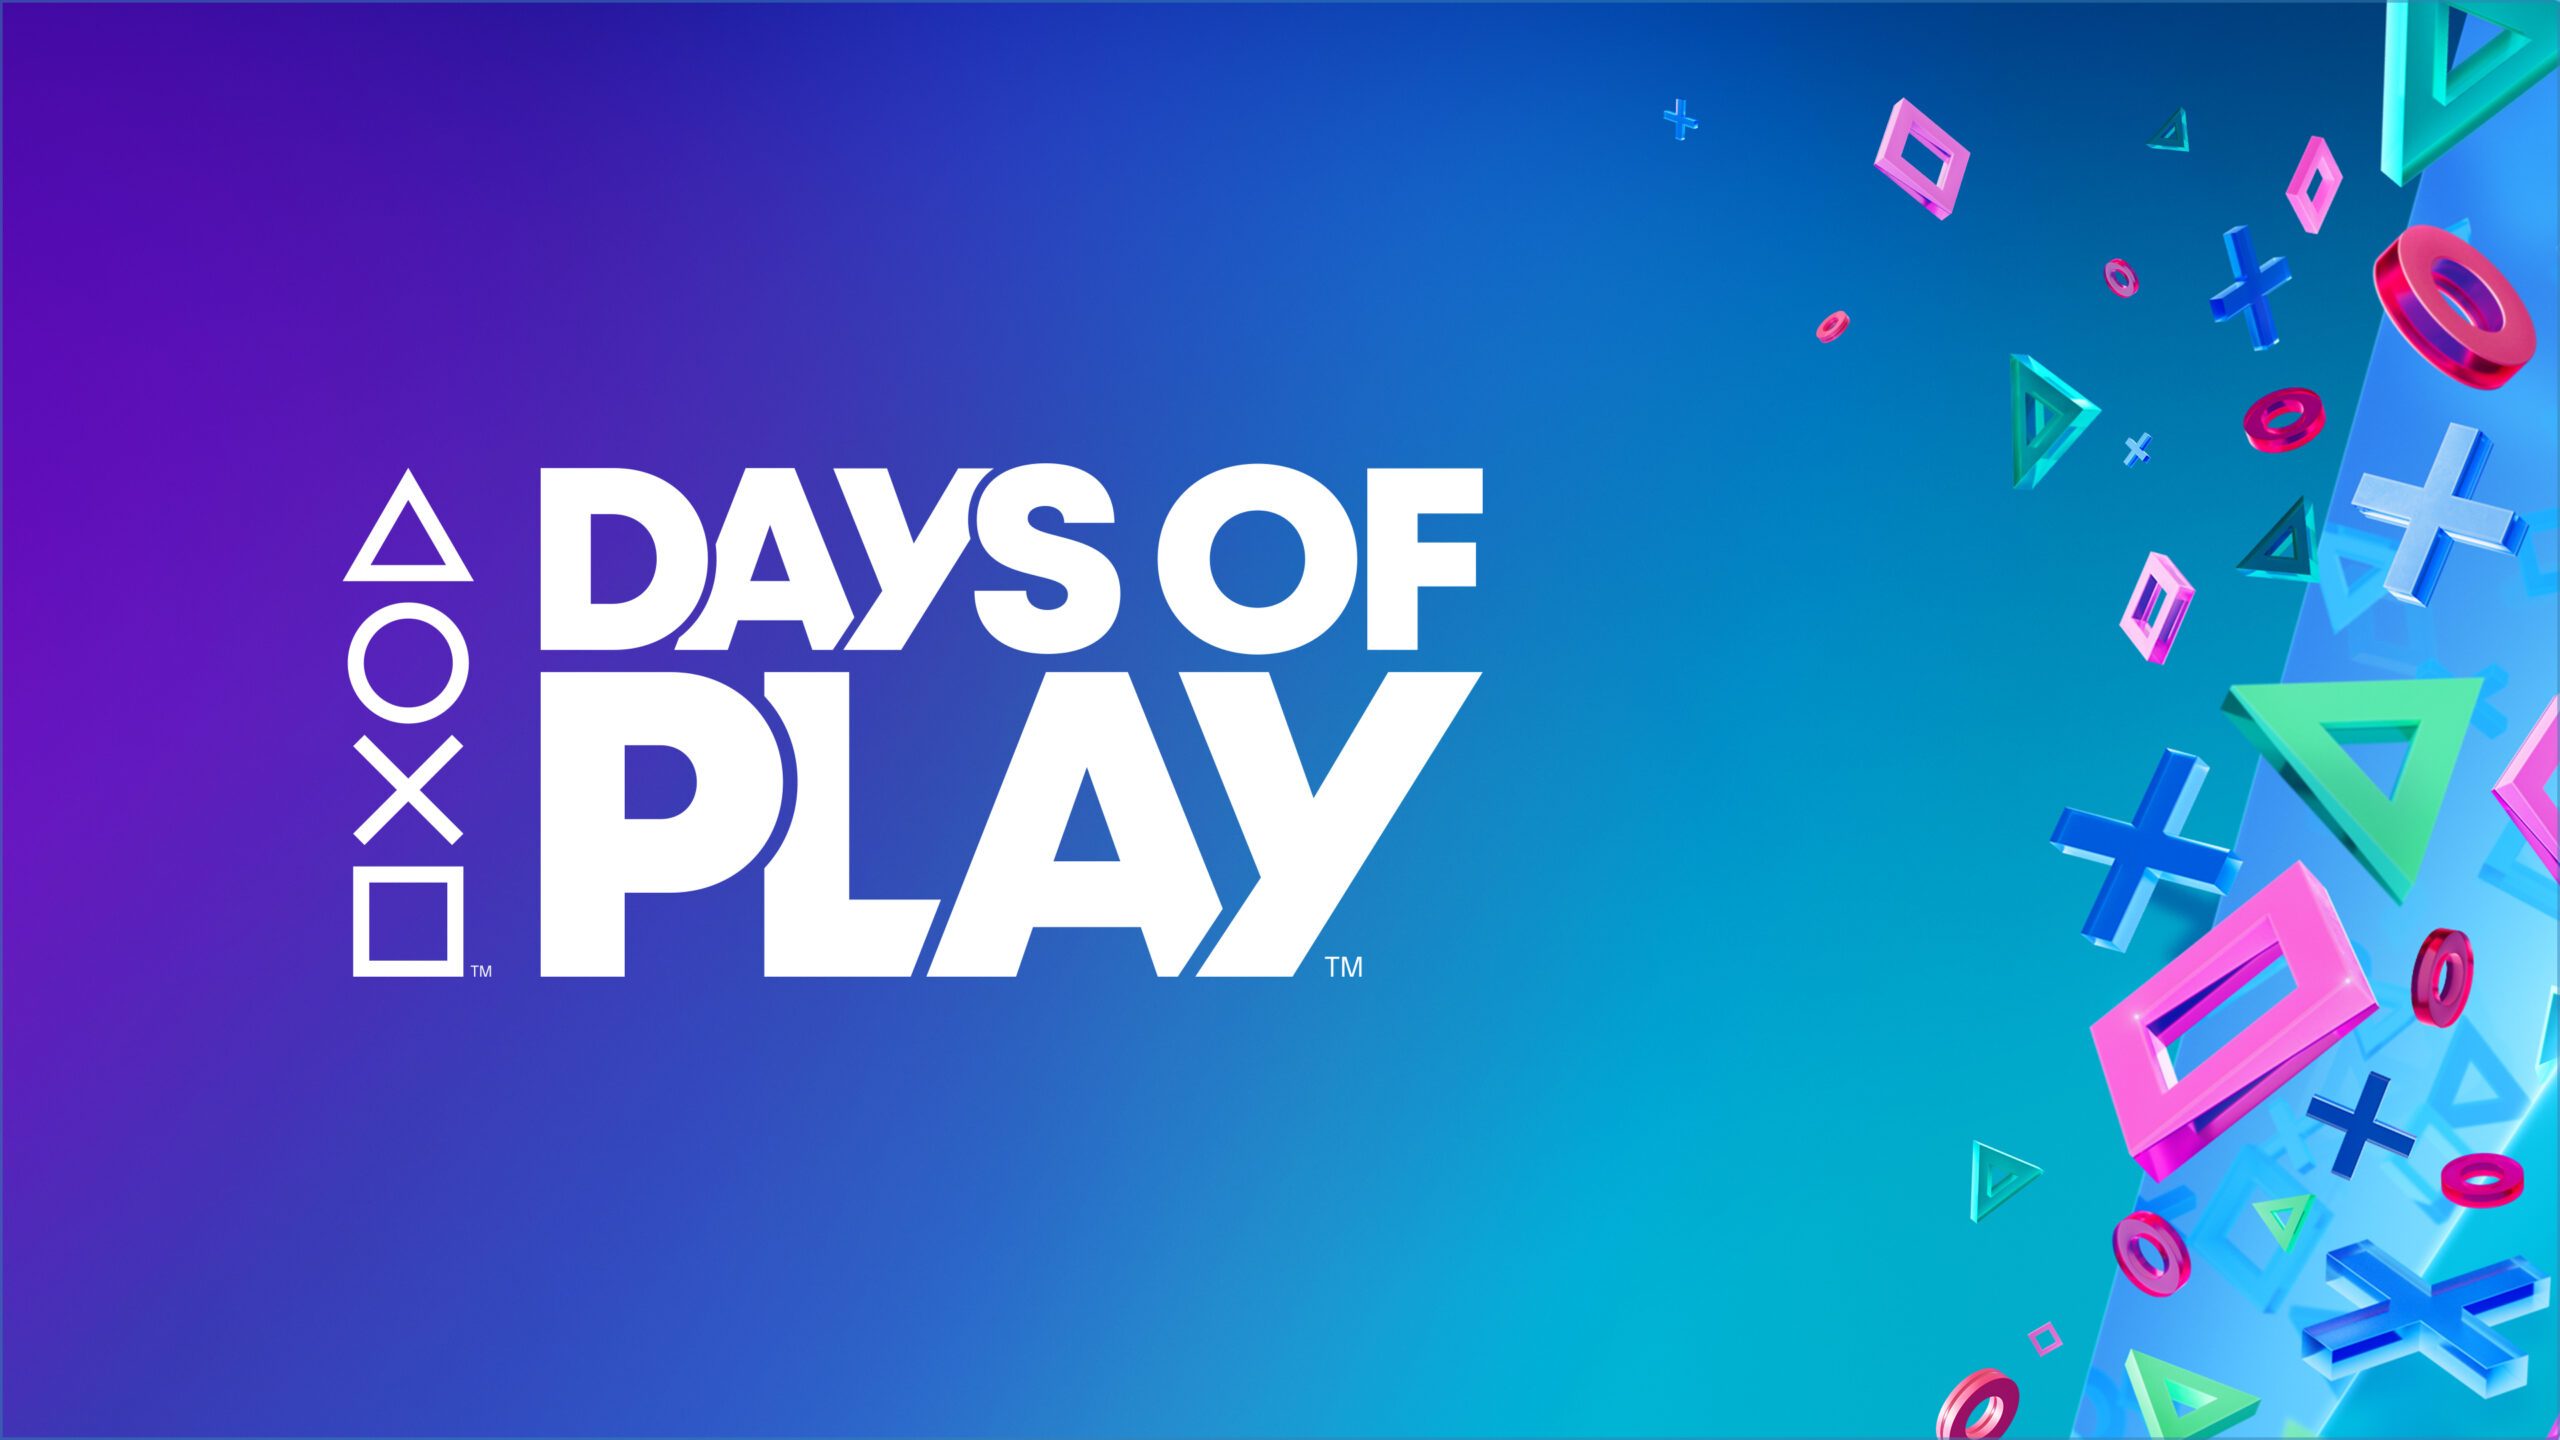 Playstation Days Of Play Deals - Starts May 29th